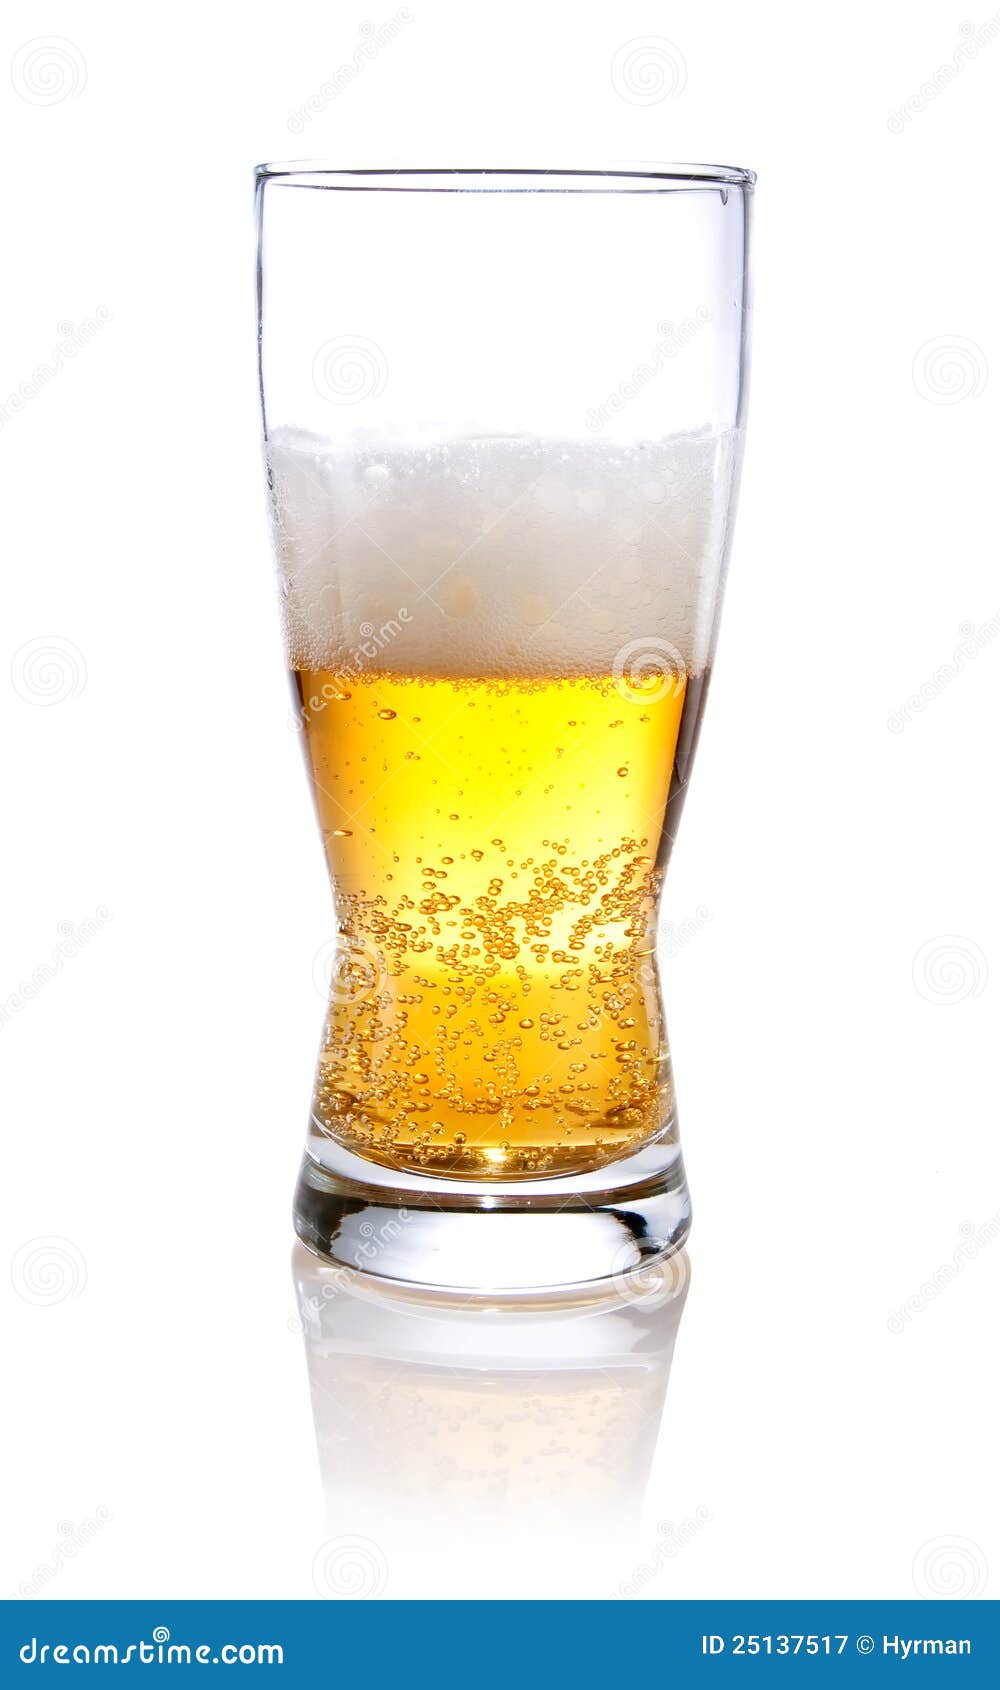 half glass of beer on a